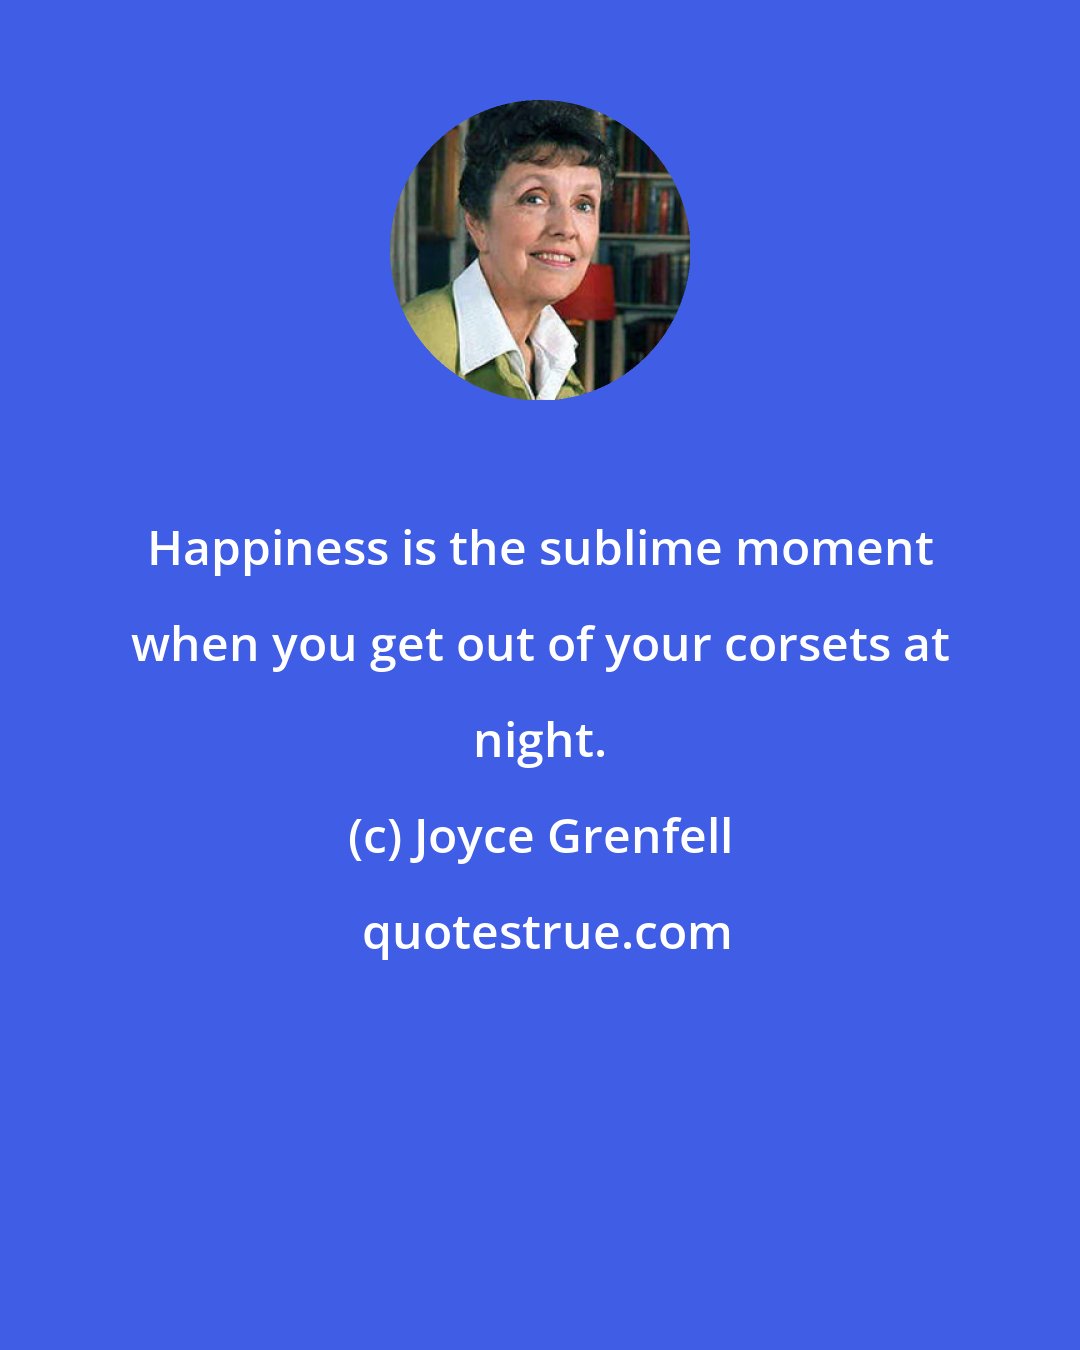 Joyce Grenfell: Happiness is the sublime moment when you get out of your corsets at night.